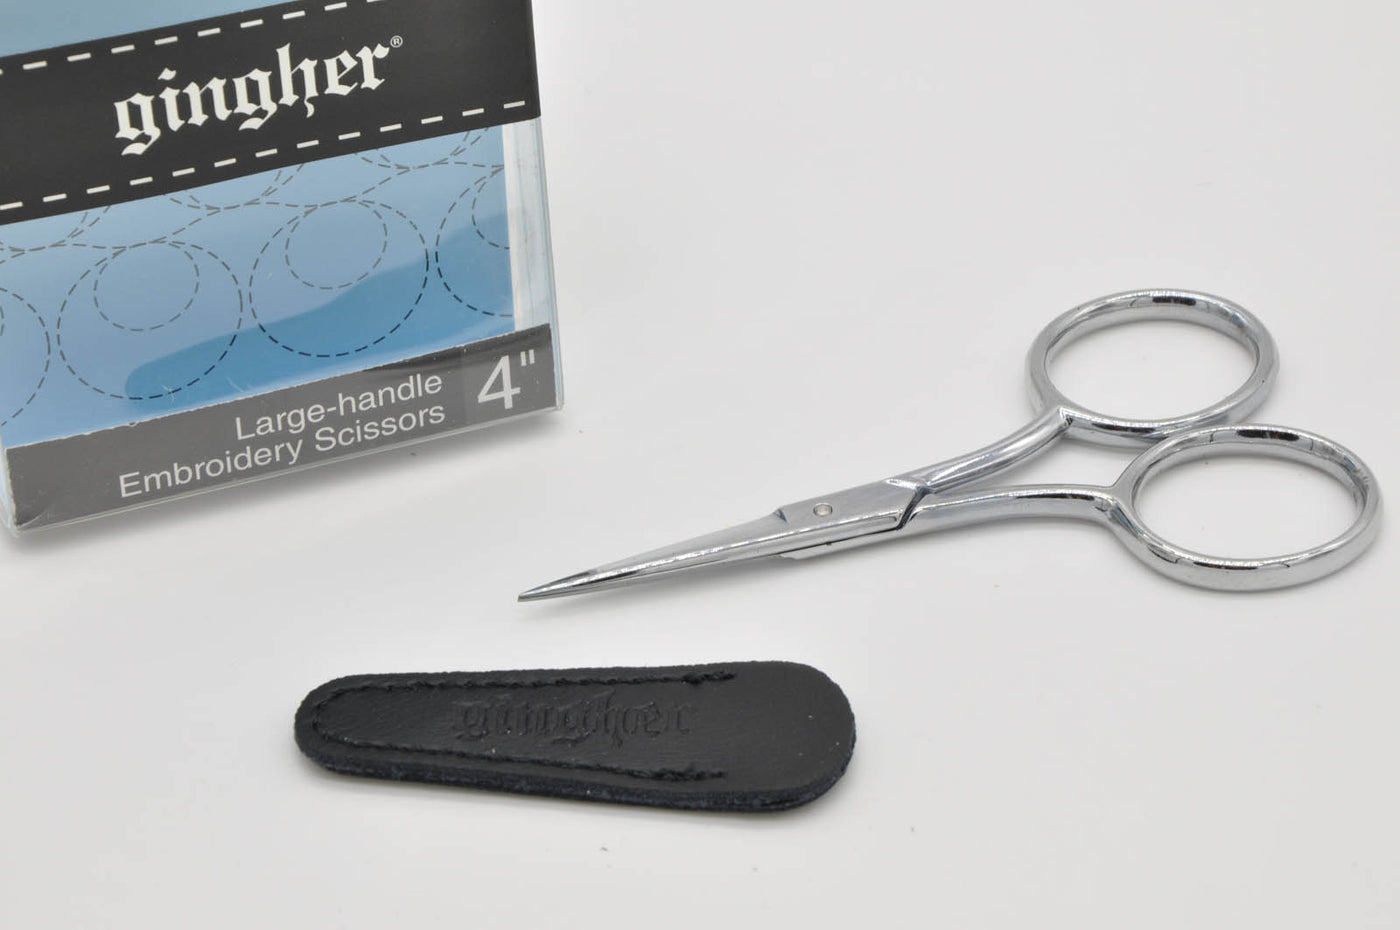 Gingher 4 Designer Series Embroidery Scissors - Needlepoint Joint